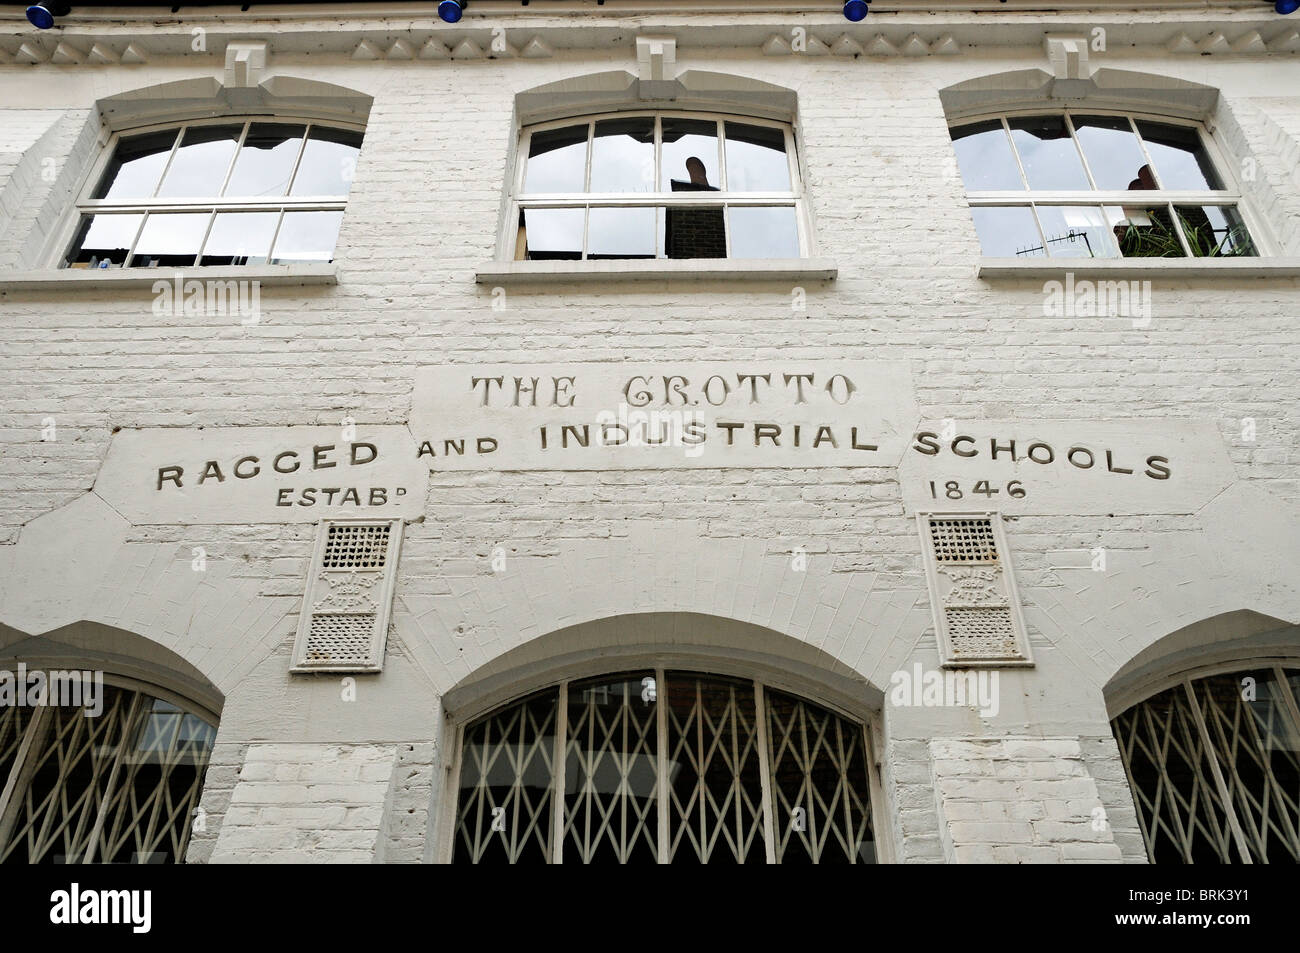 The Grotto Ragged and Industrial Schools Marylebone London England UK Stock Photo